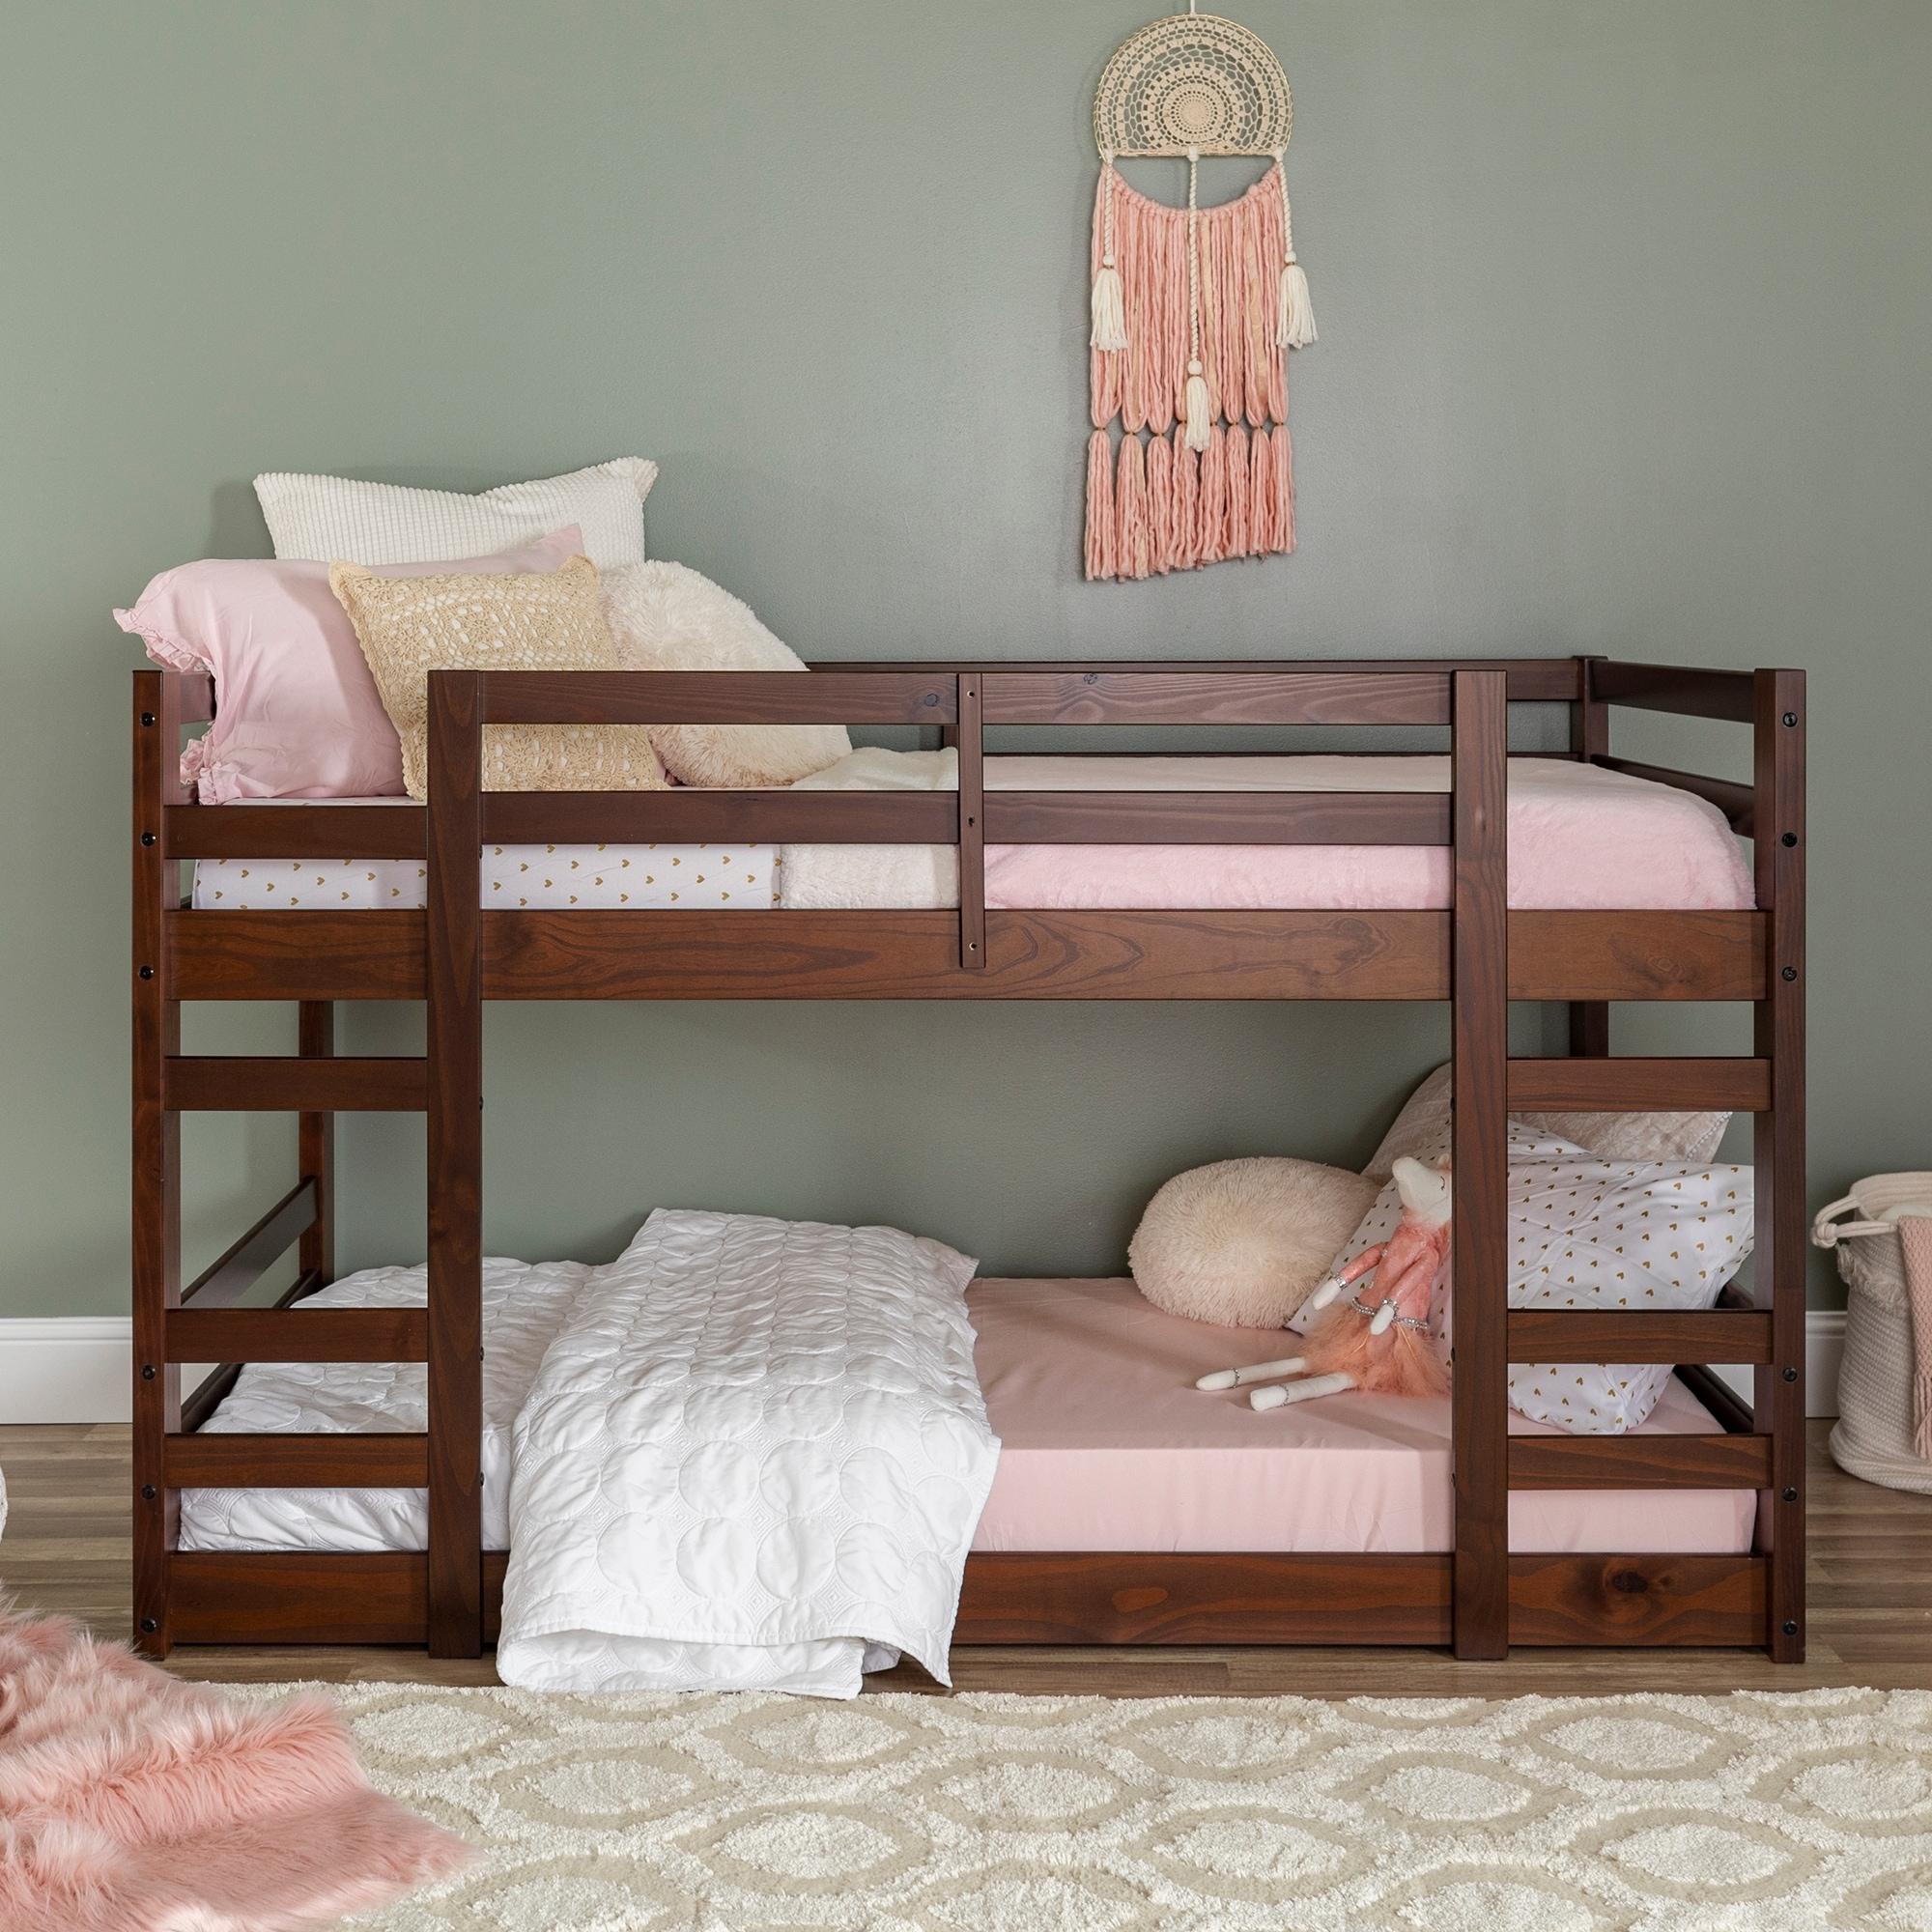 bunk beds for sale at low prices